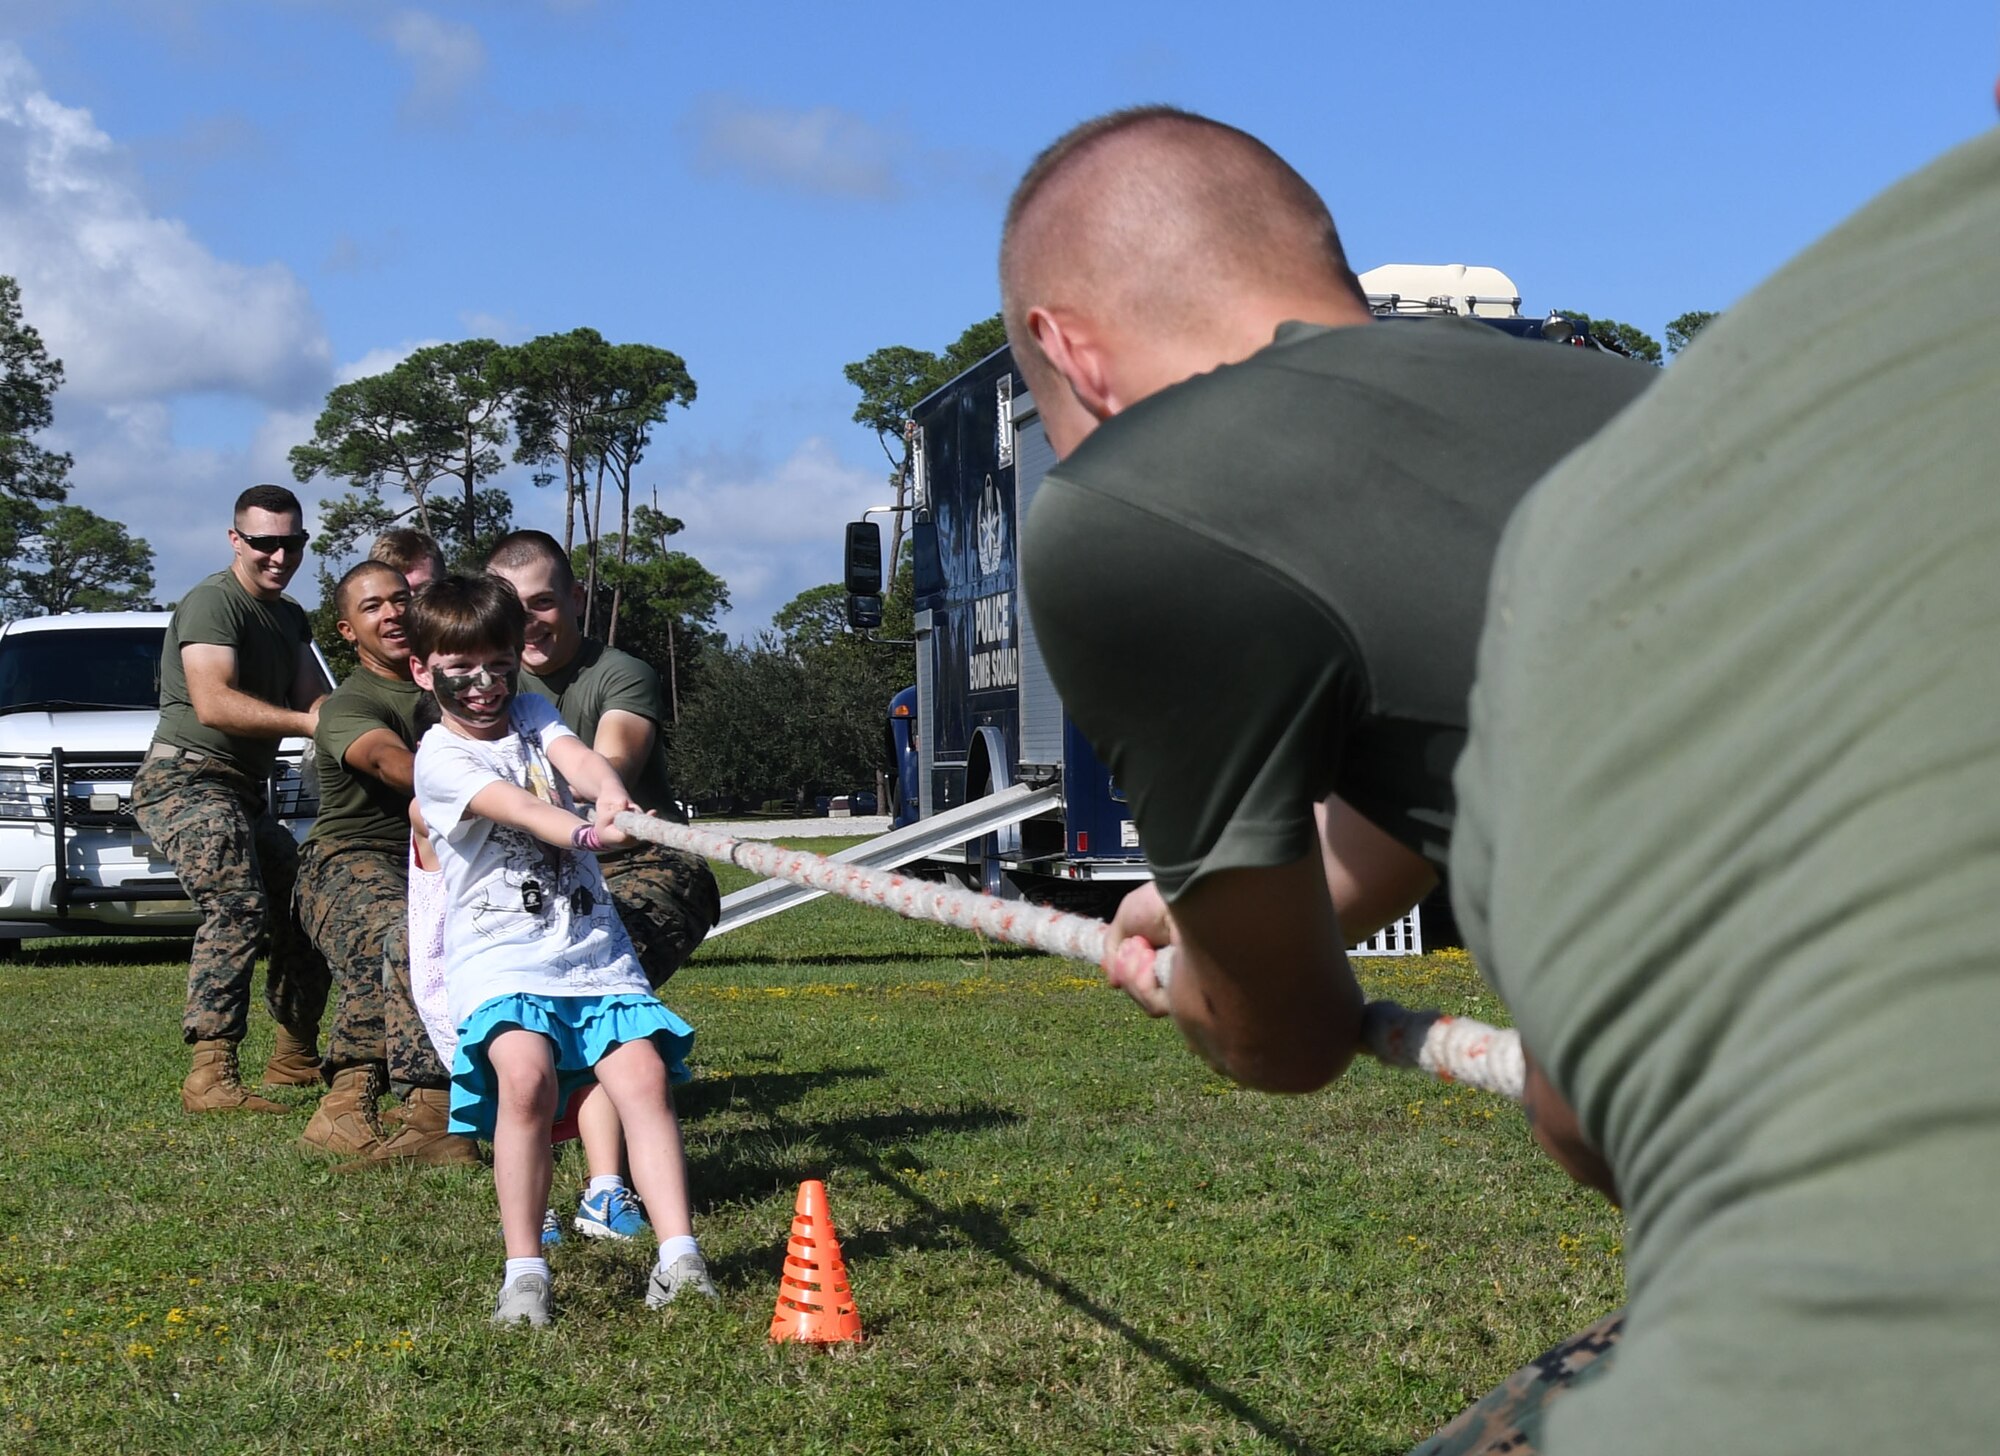 Maddison Niehus, daughter of Staff Sgt. Lisa Niehus, 81st Medical Group instructor, joins Keesler Marine Detachment Marines in a round of tug-of-war during Operation Hero Oct. 14, 2017, on Keesler Air Force Base, Mississippi. The event was designed to help children better understand what their parents do when they deploy. (U.S. Air Force photo by Kemberly Groue)